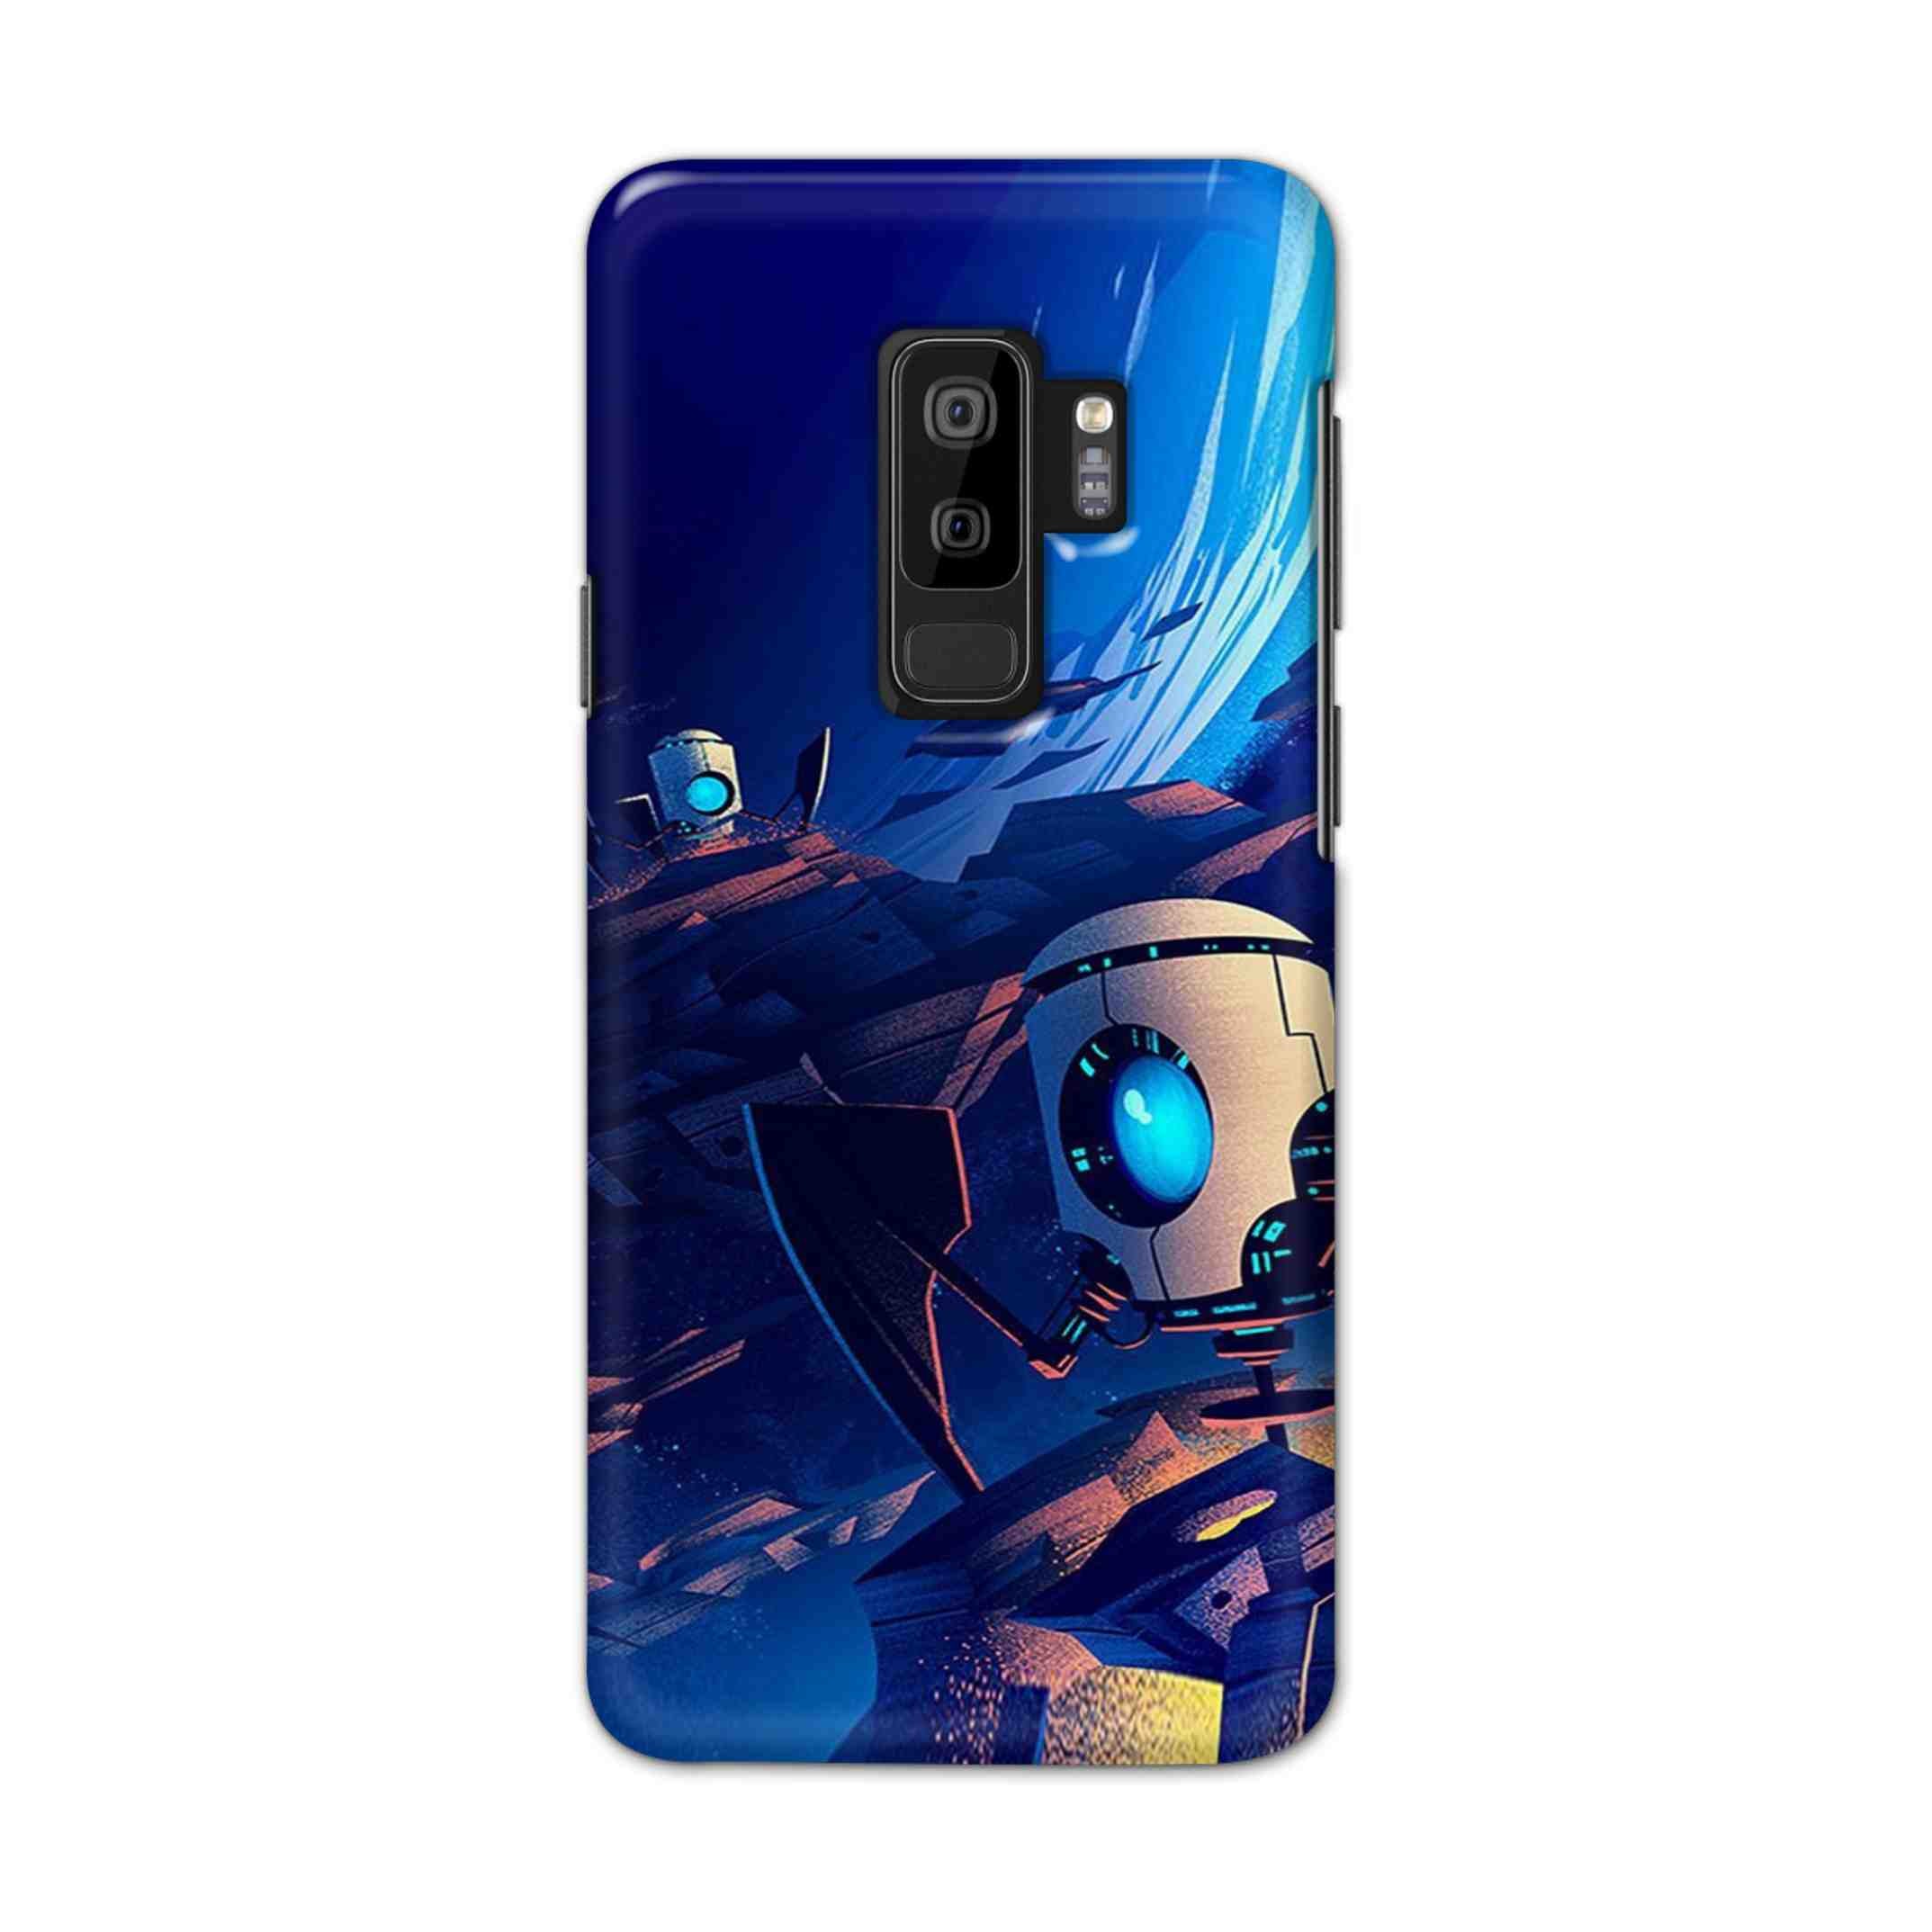 Buy Spaceship Robot Hard Back Mobile Phone Case Cover For Samsung S9 plus Online